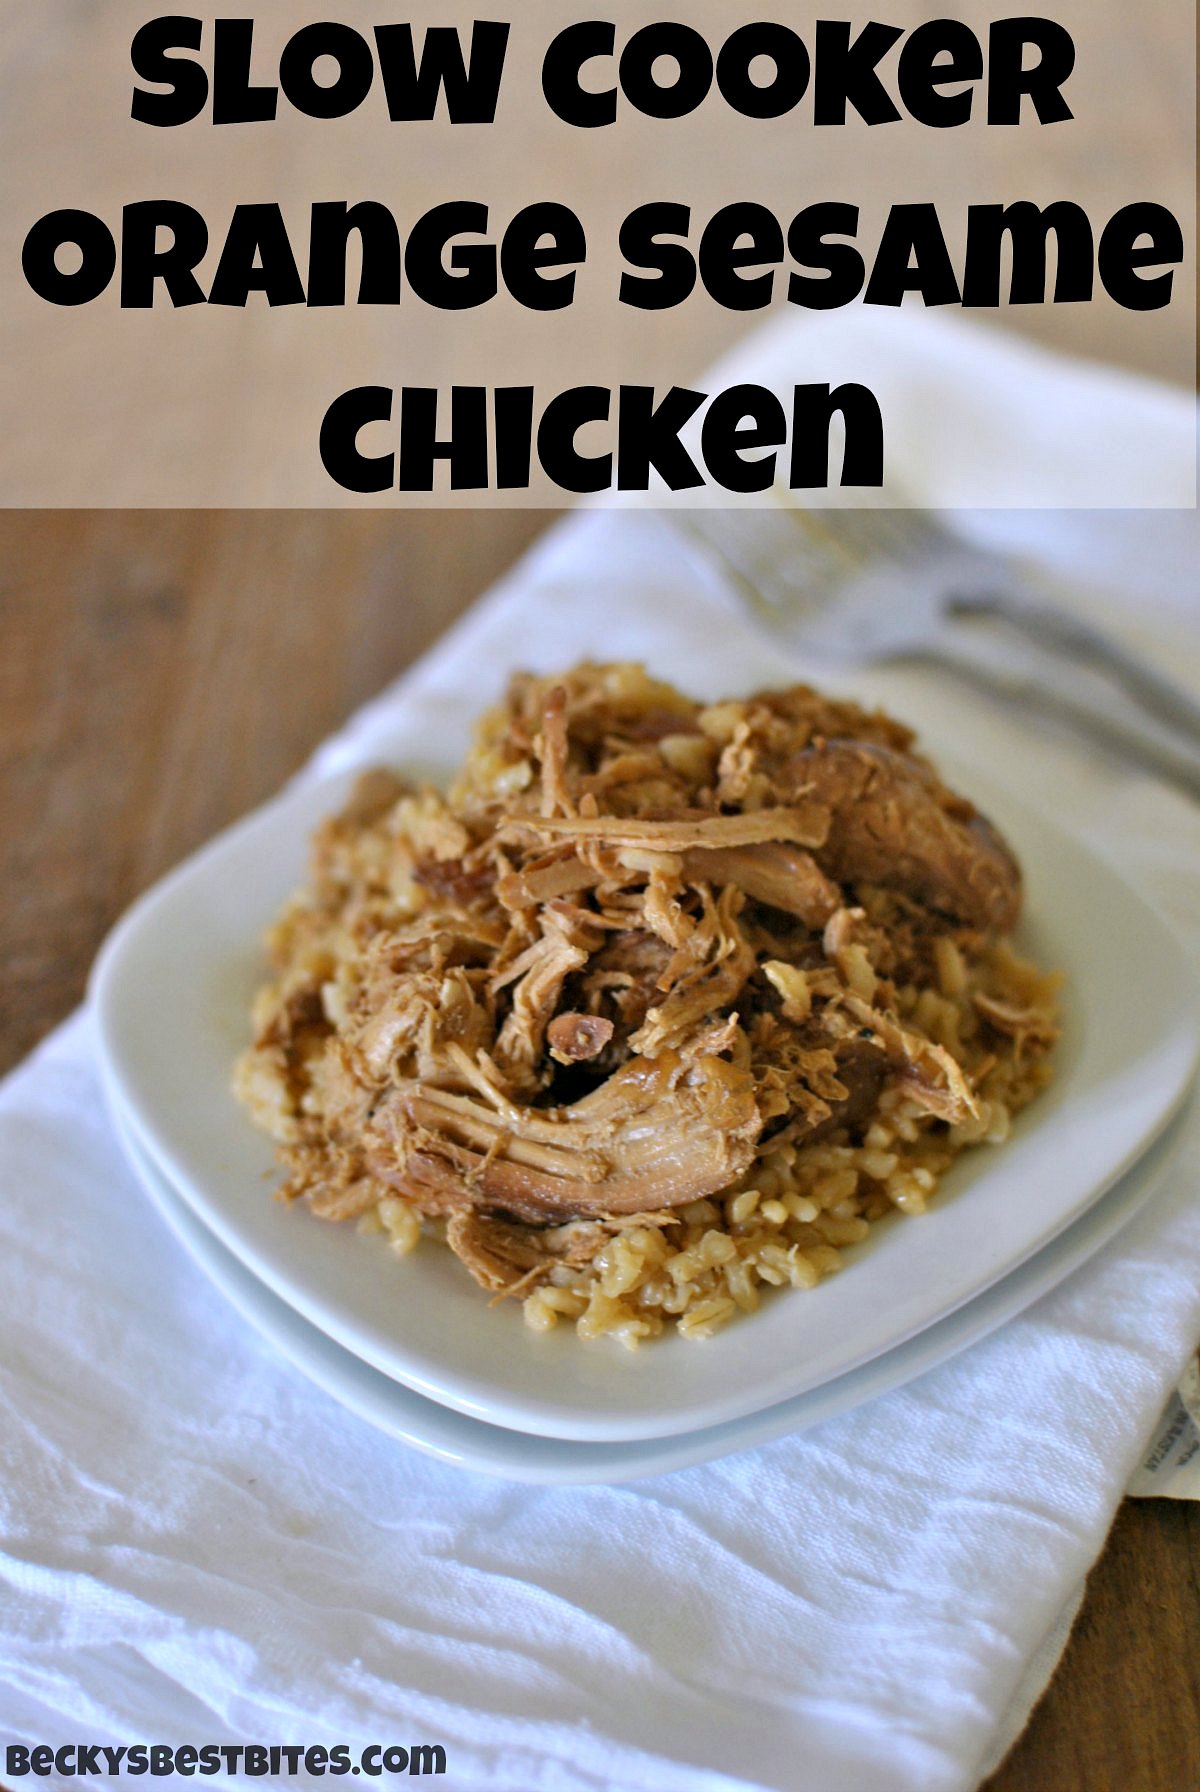 Slow Cooker Orange Sesame Chicken with Honey. Sweet, tangy and healthy, this meal make crazy weeknights easy! Becky's Best Bites